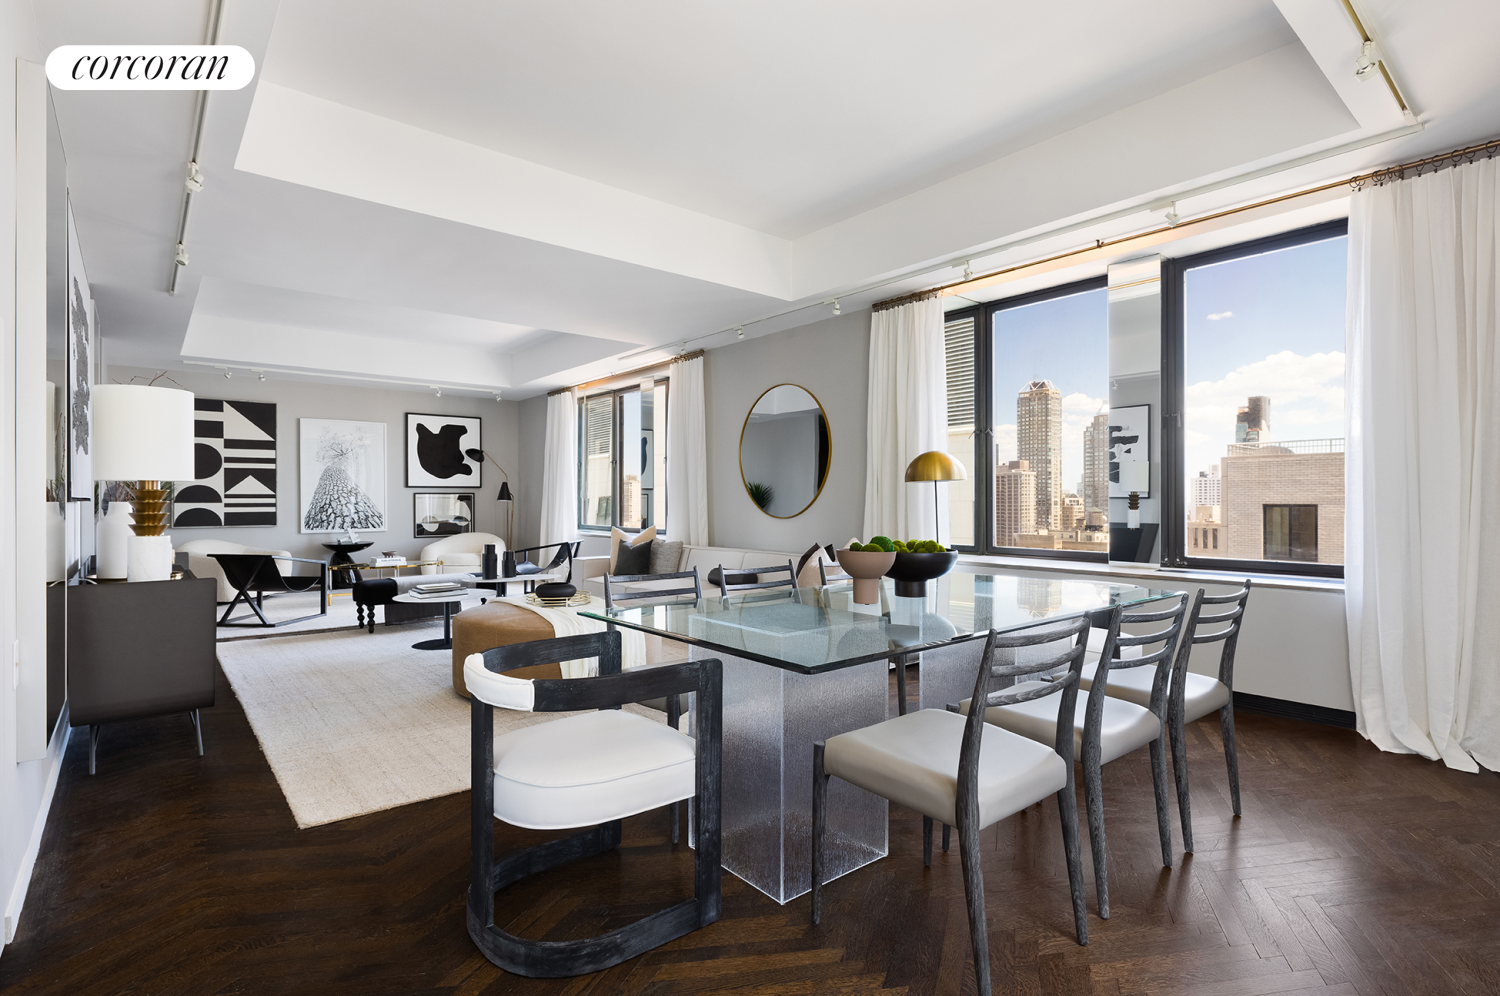 795 5th Avenue 2315, Lenox Hill, Upper East Side, NYC - 3 Bedrooms  
3 Bathrooms  
6 Rooms - 